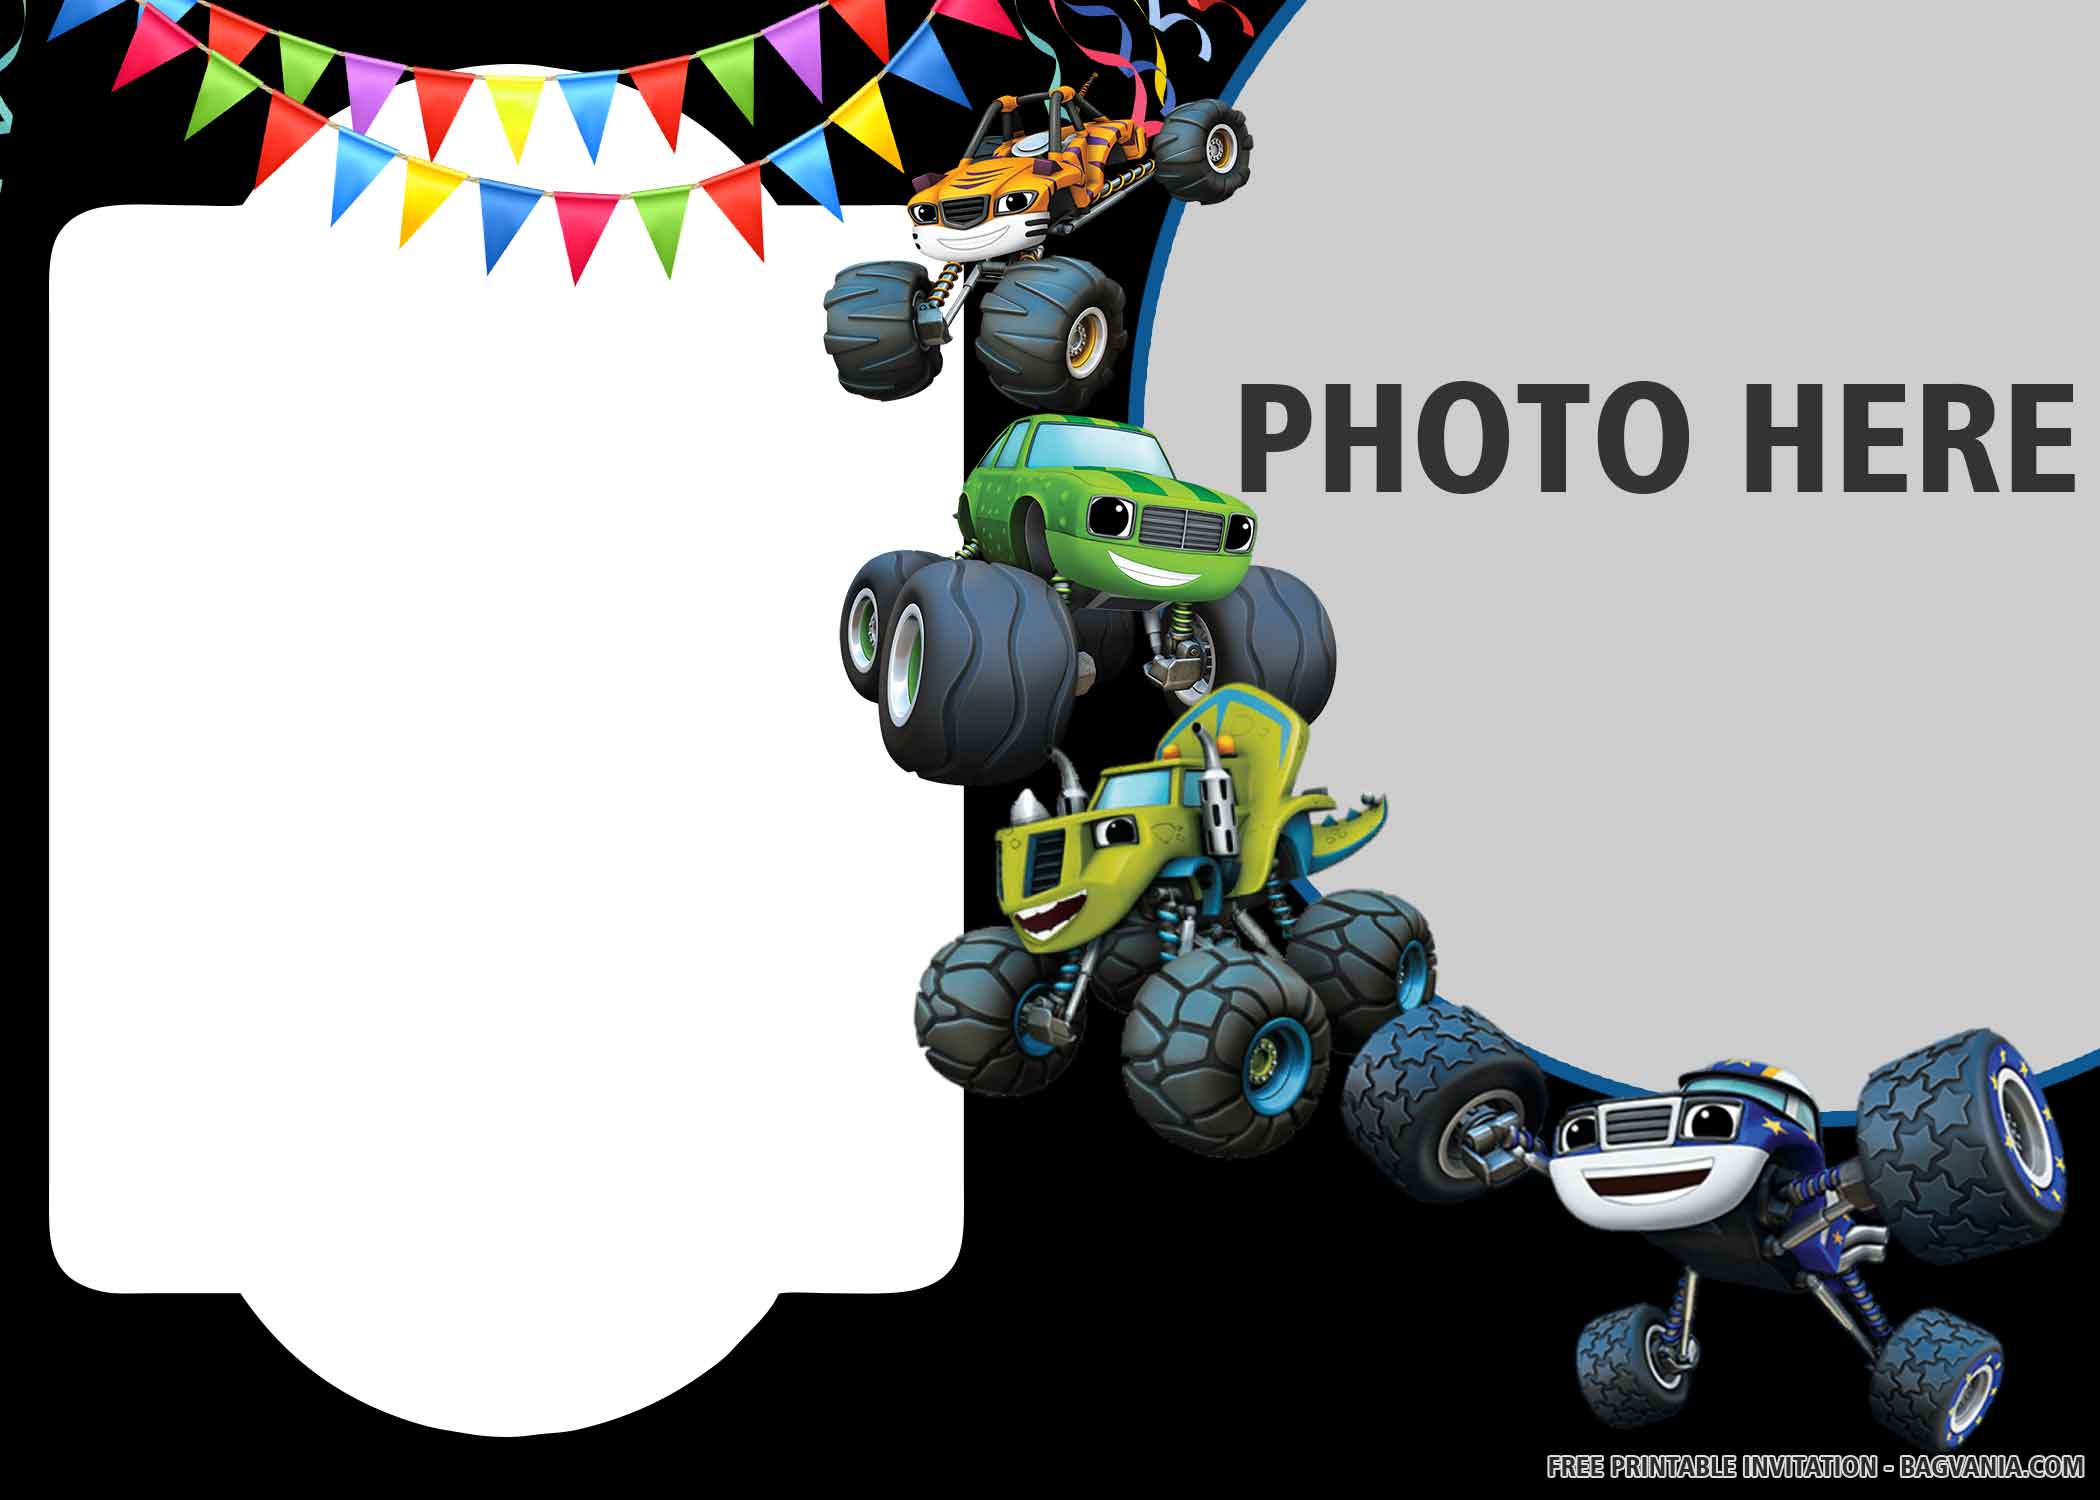 2.	FREE Monster Cars in Series with Photo, Ribbons and Black Background